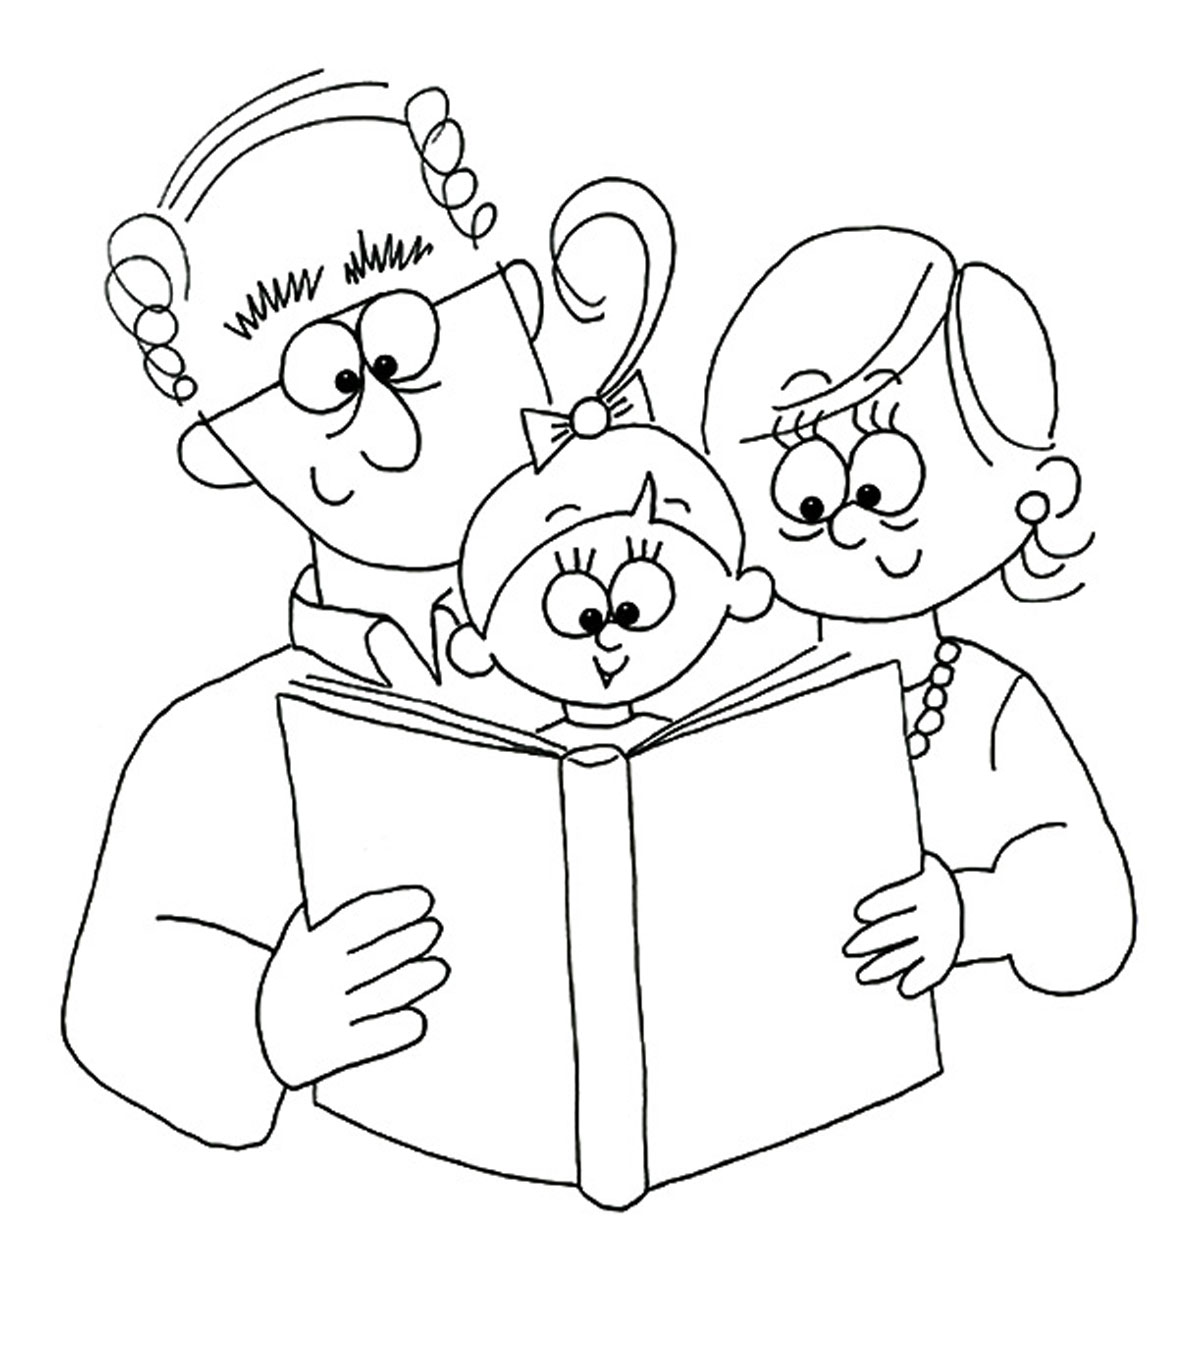 Holiday Coloring Pages MomJunction